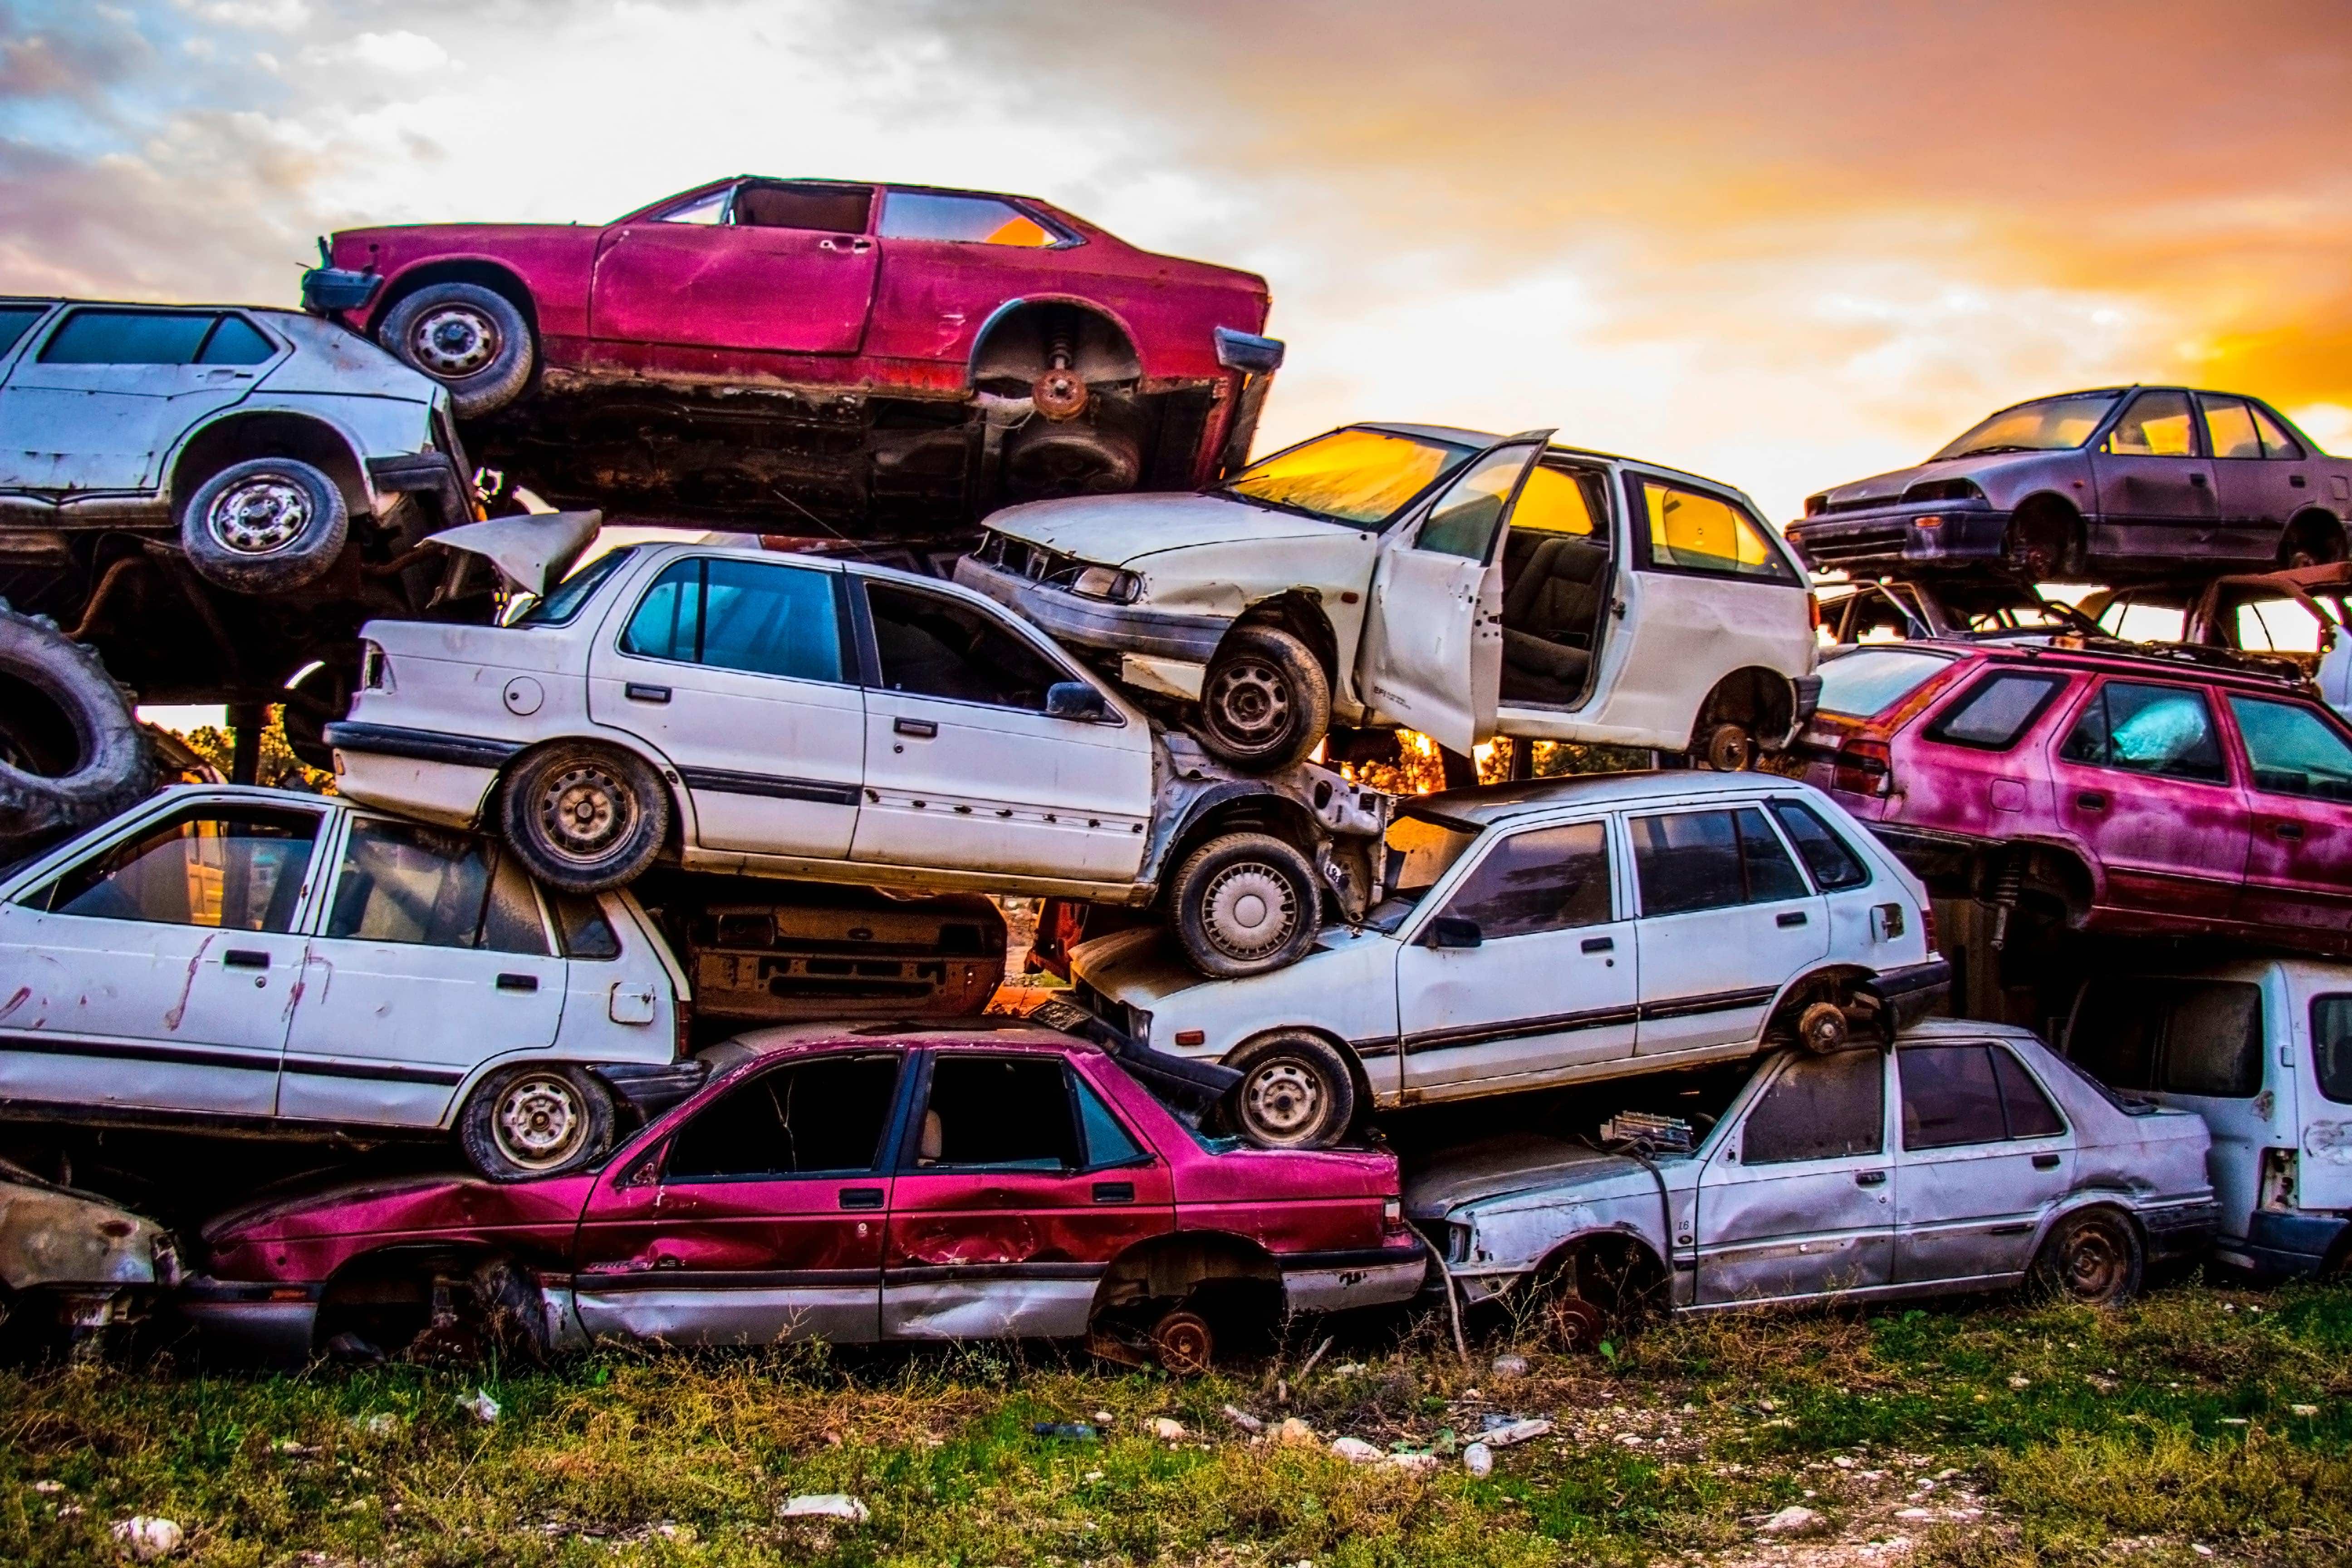 How to sell car to Junkyard